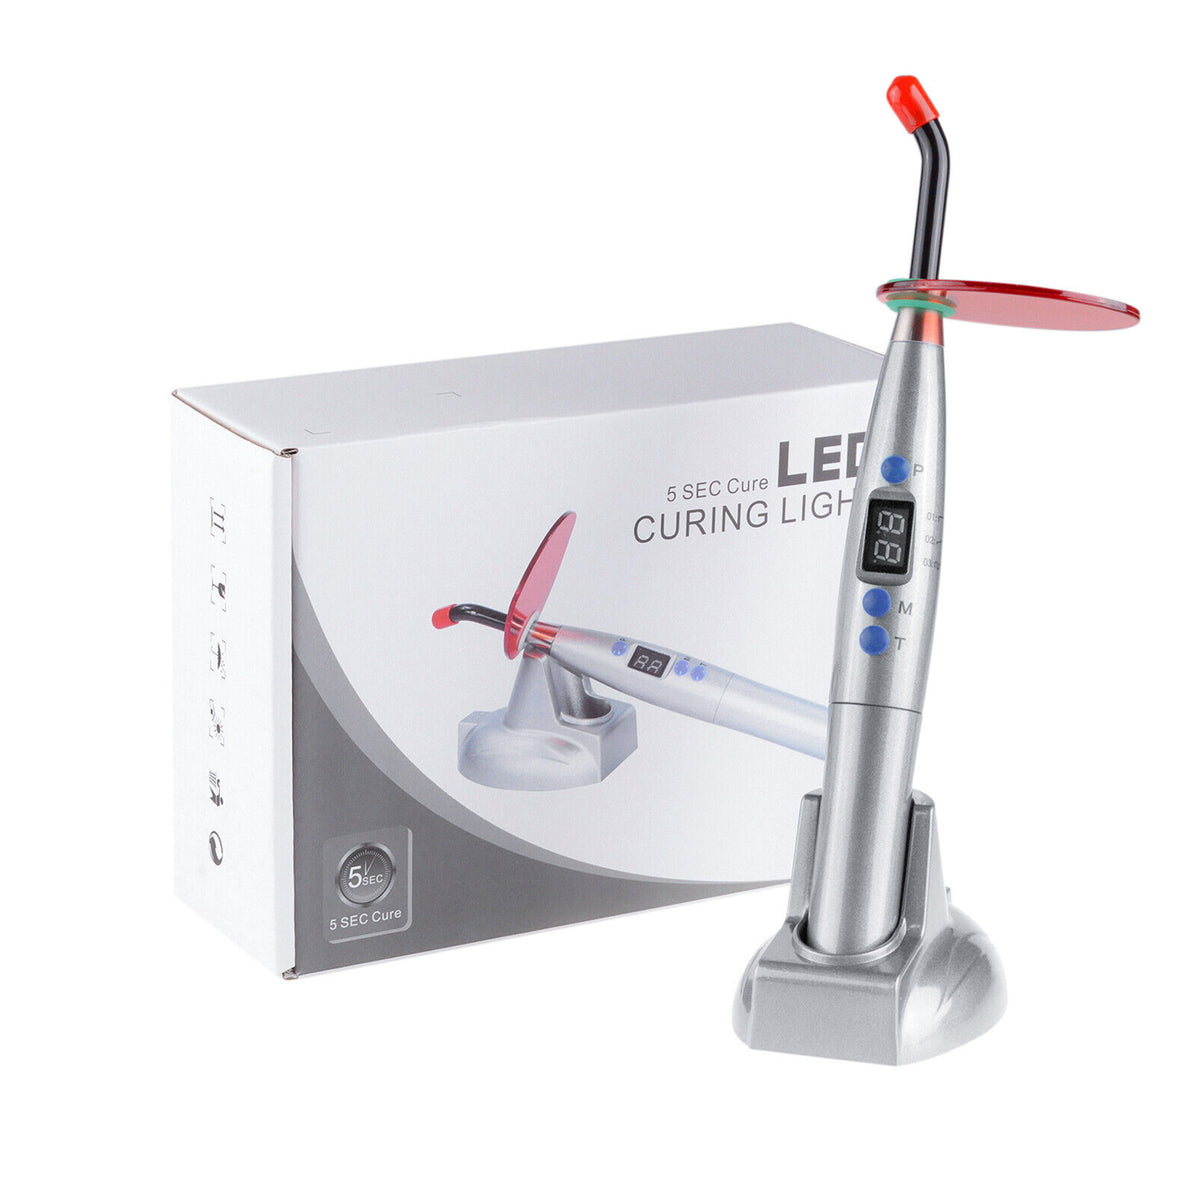 5 Sec Cure Wireless Dental LED Curing Light